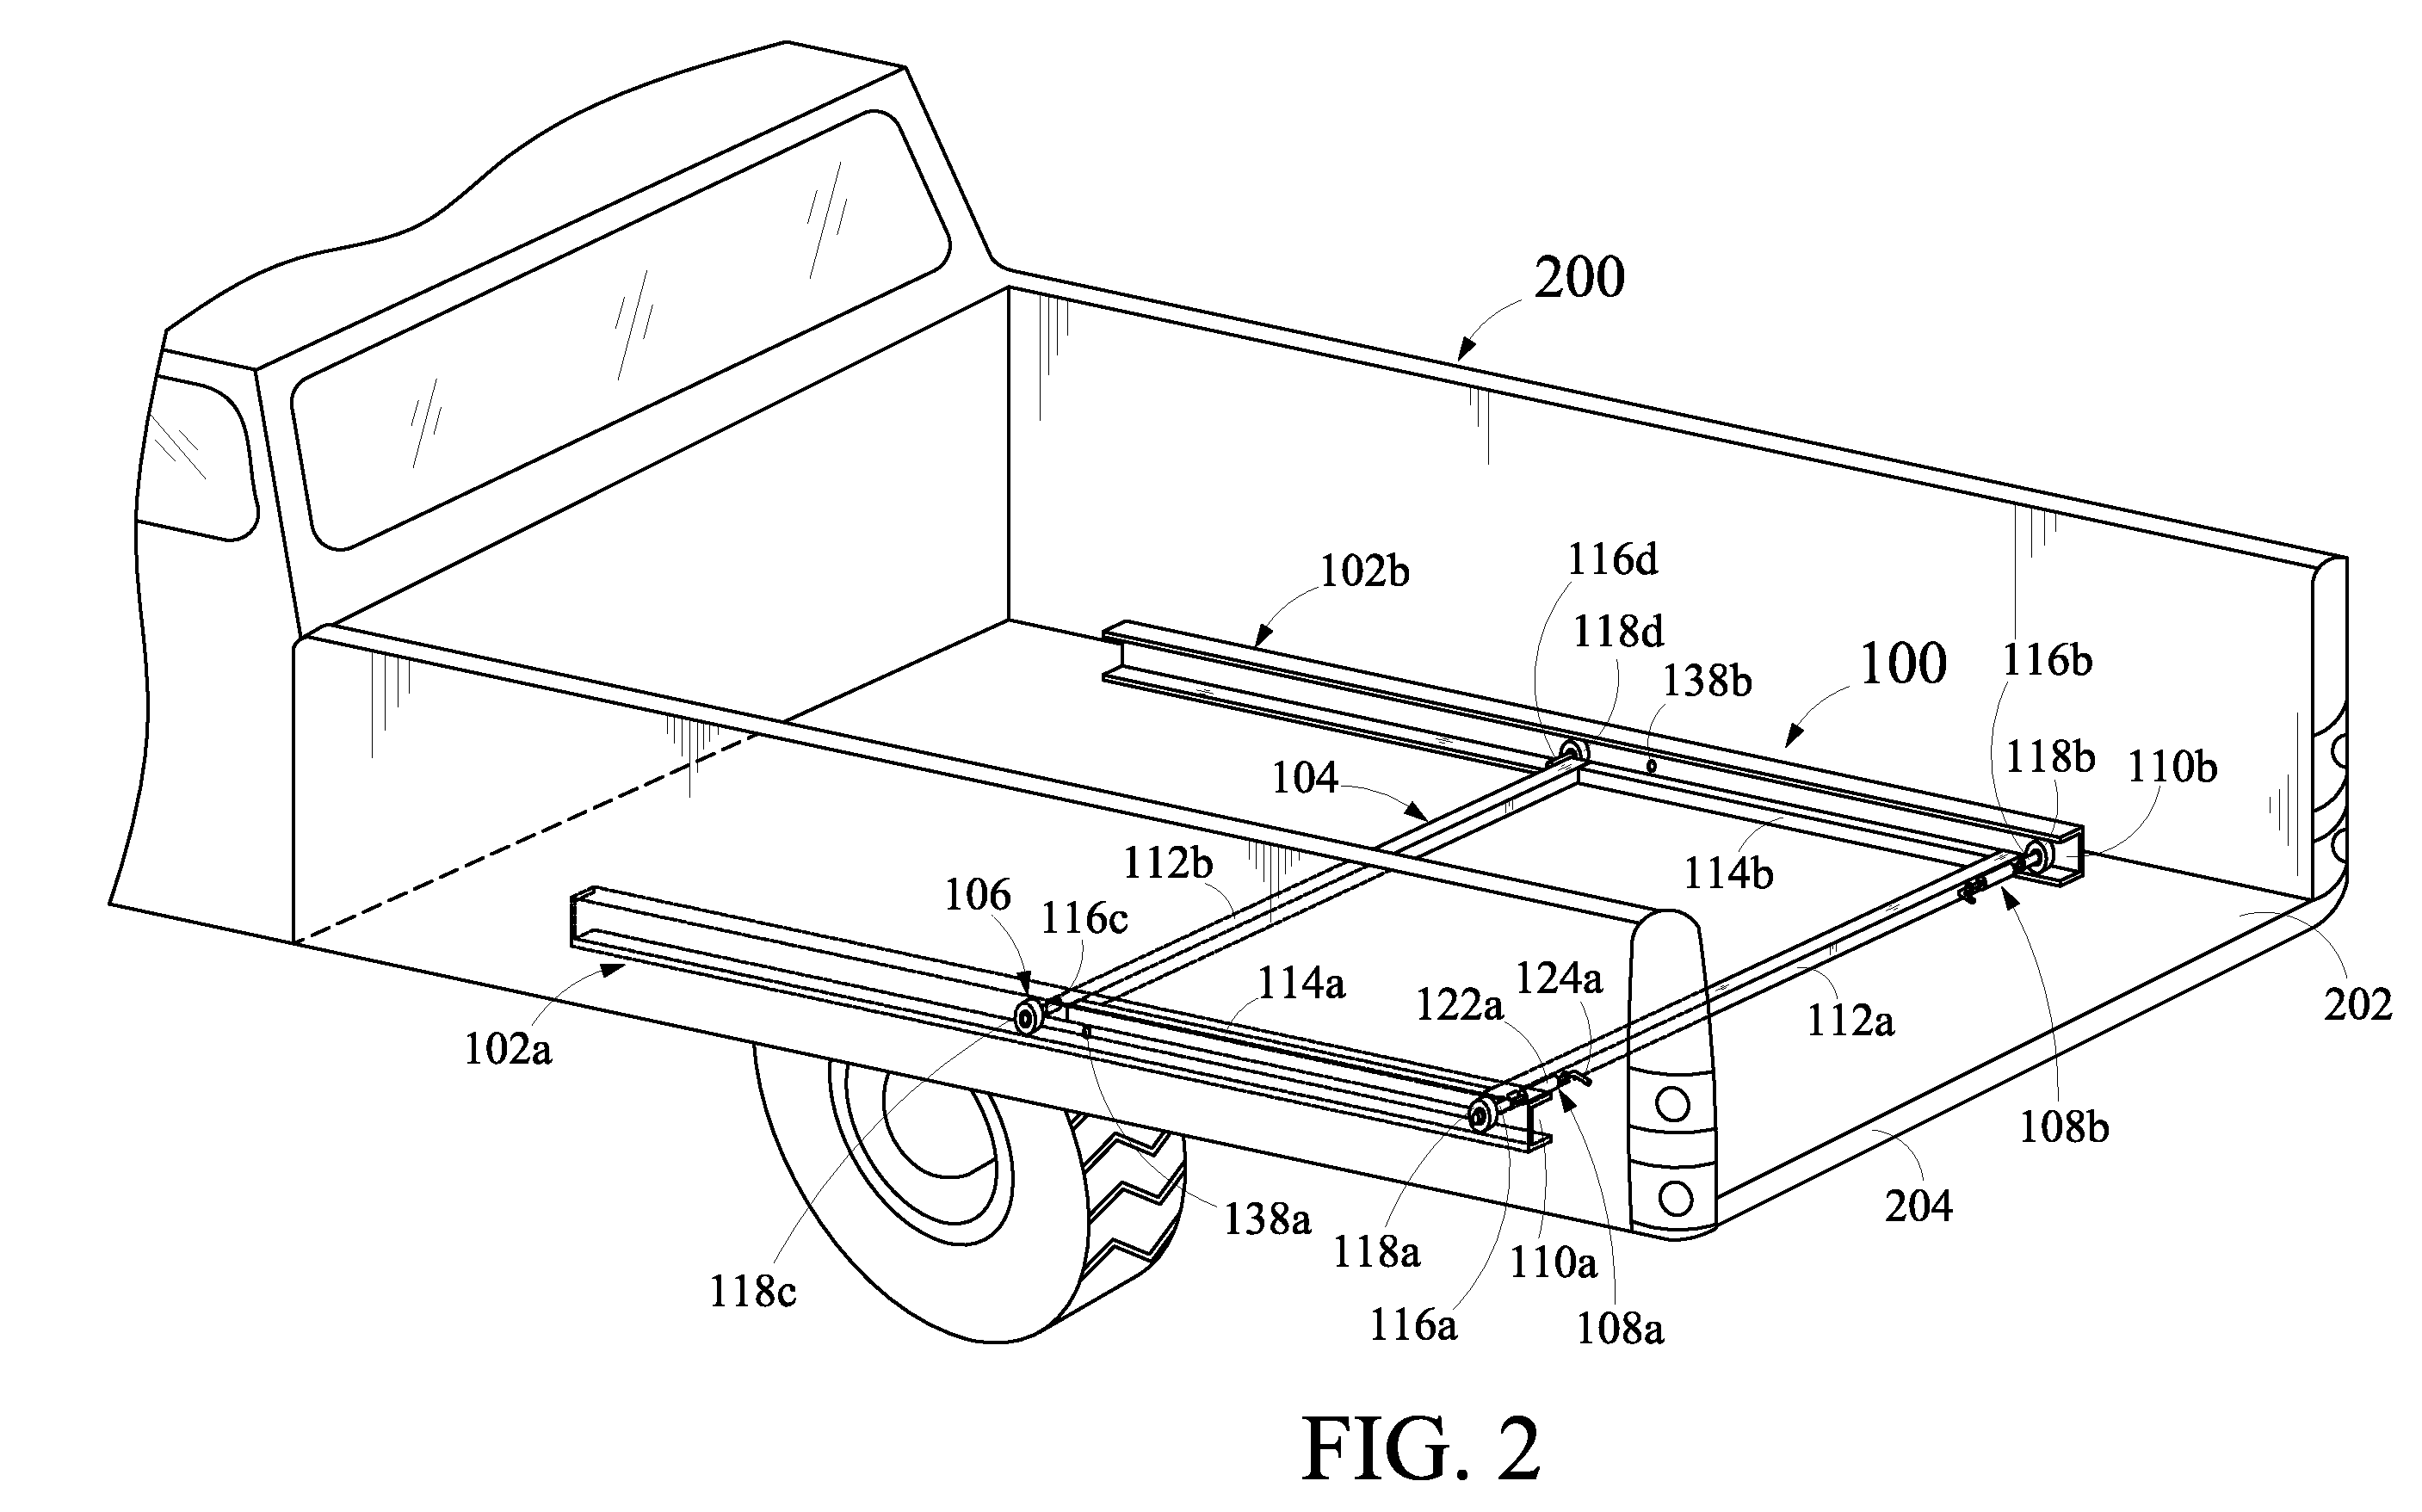 Load handling apparatus for cargo vehicle